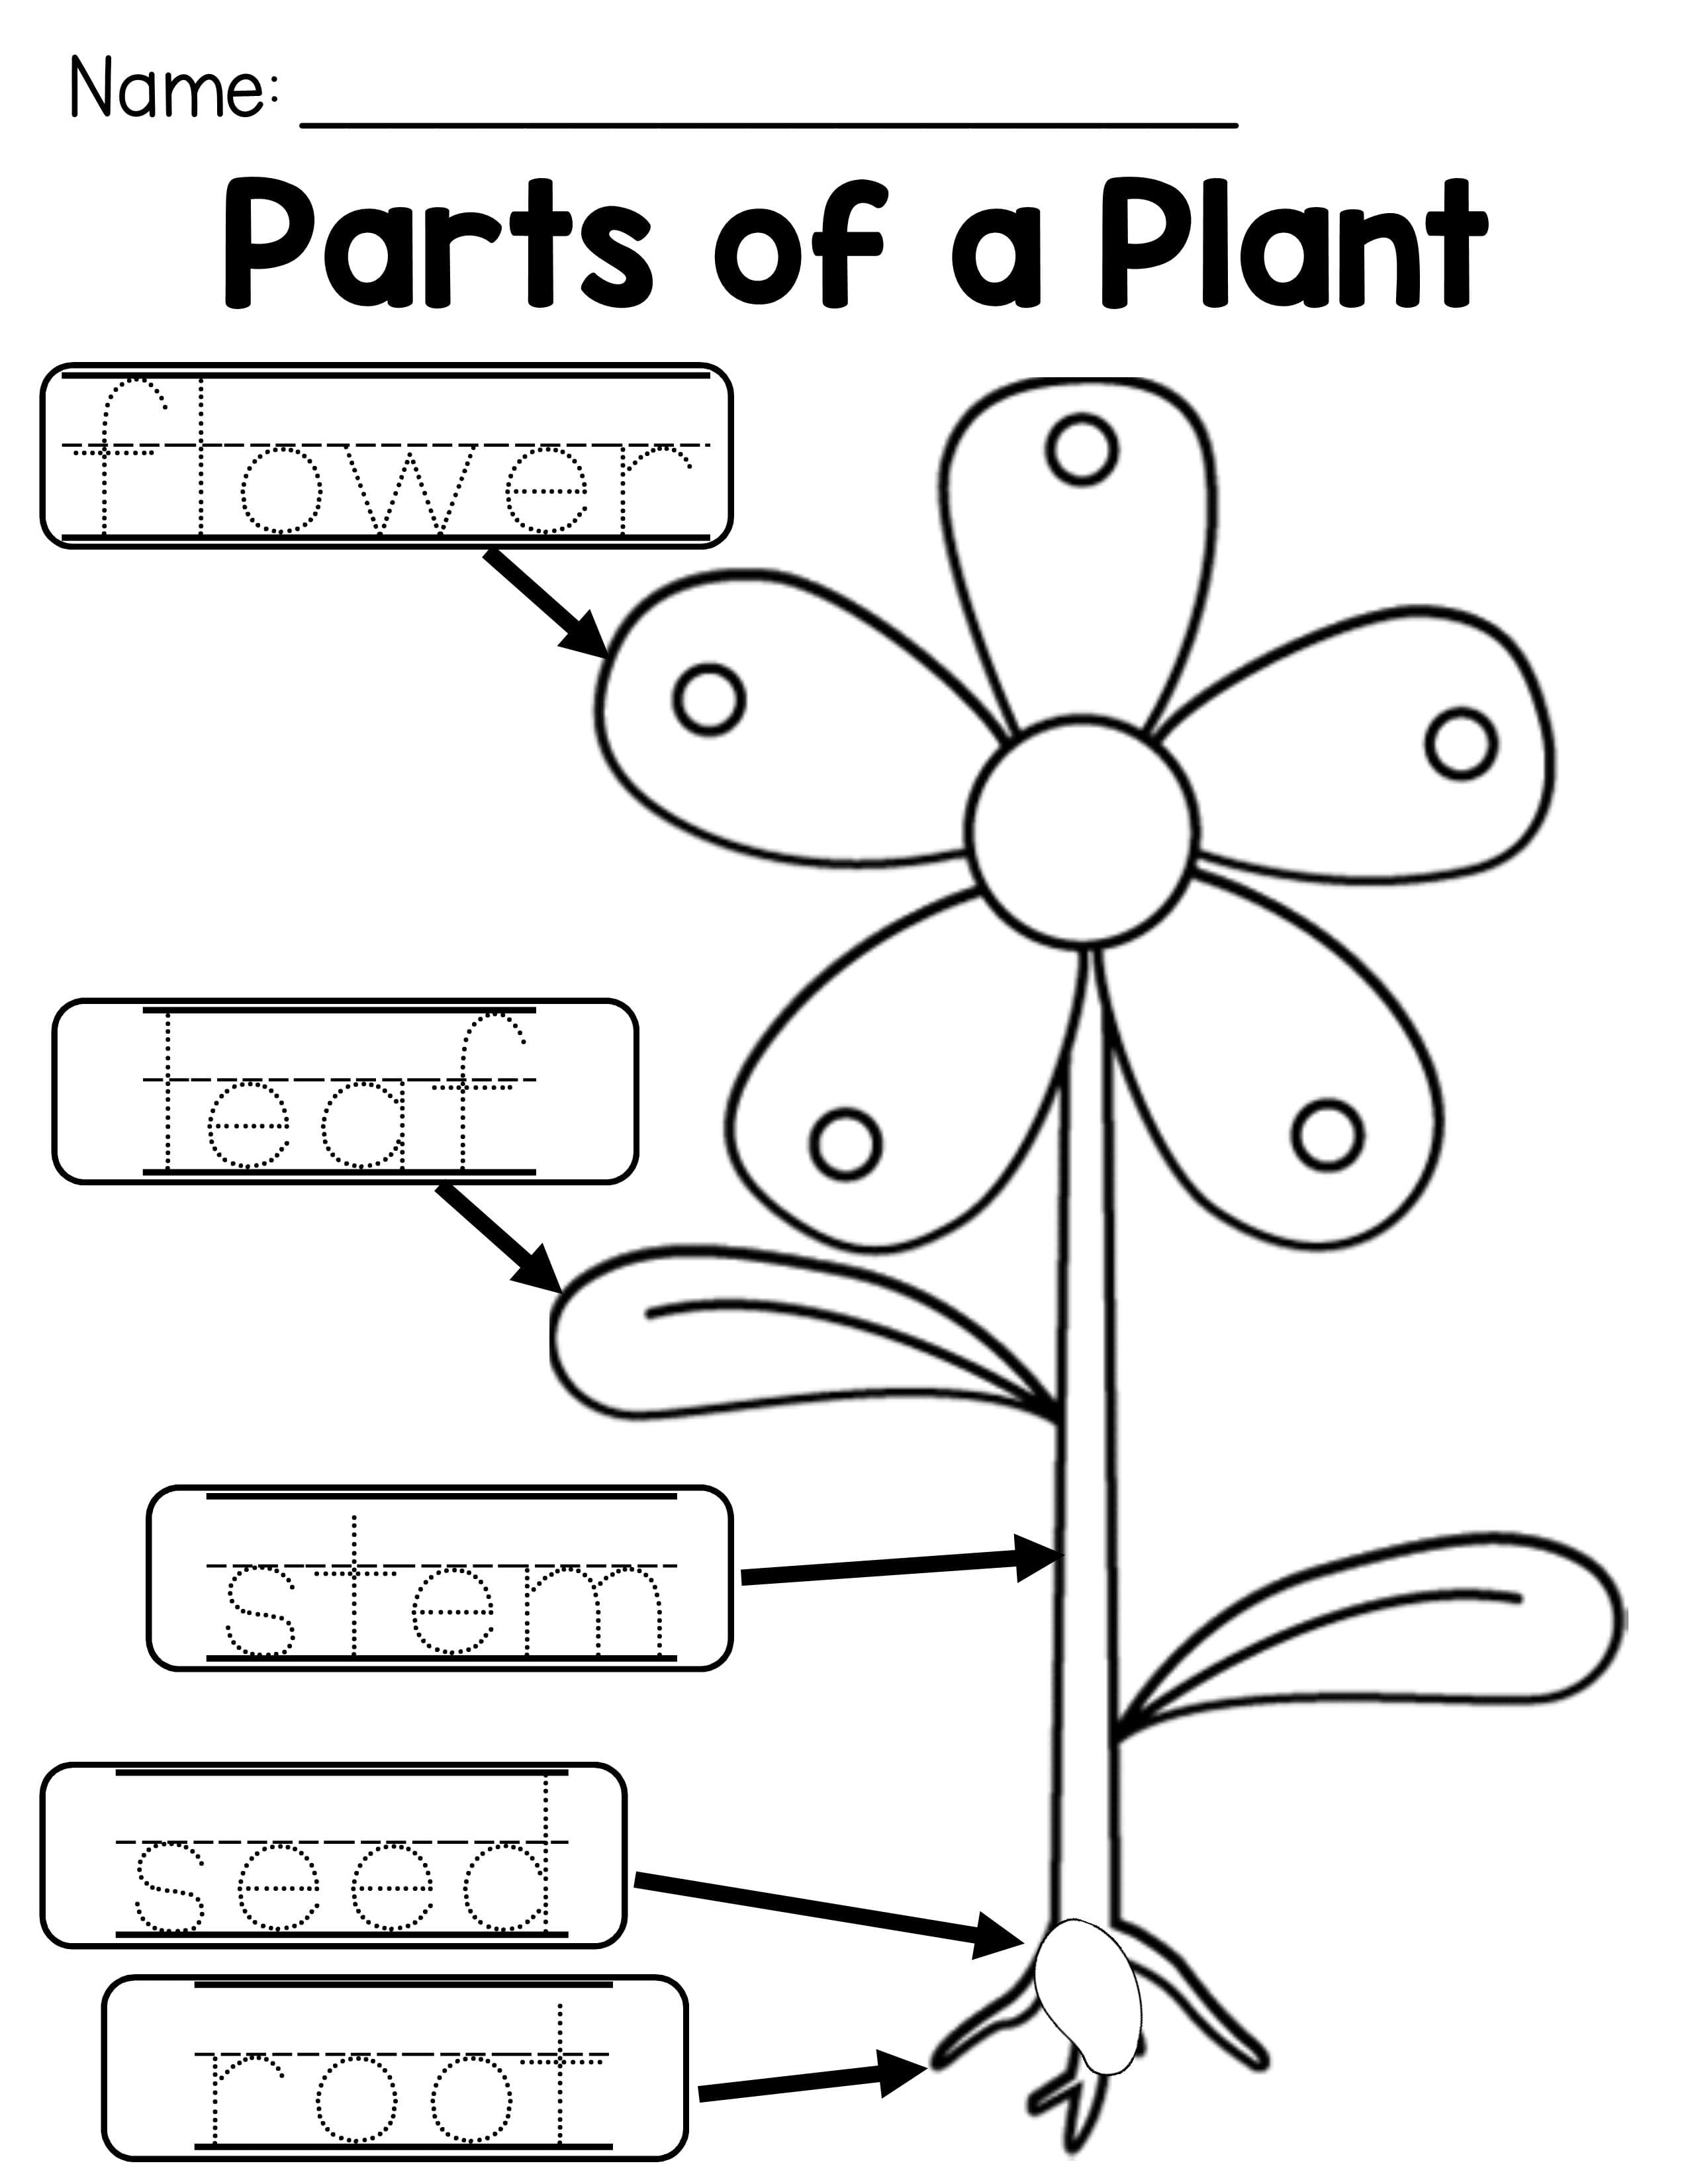 parts-of-a-plant